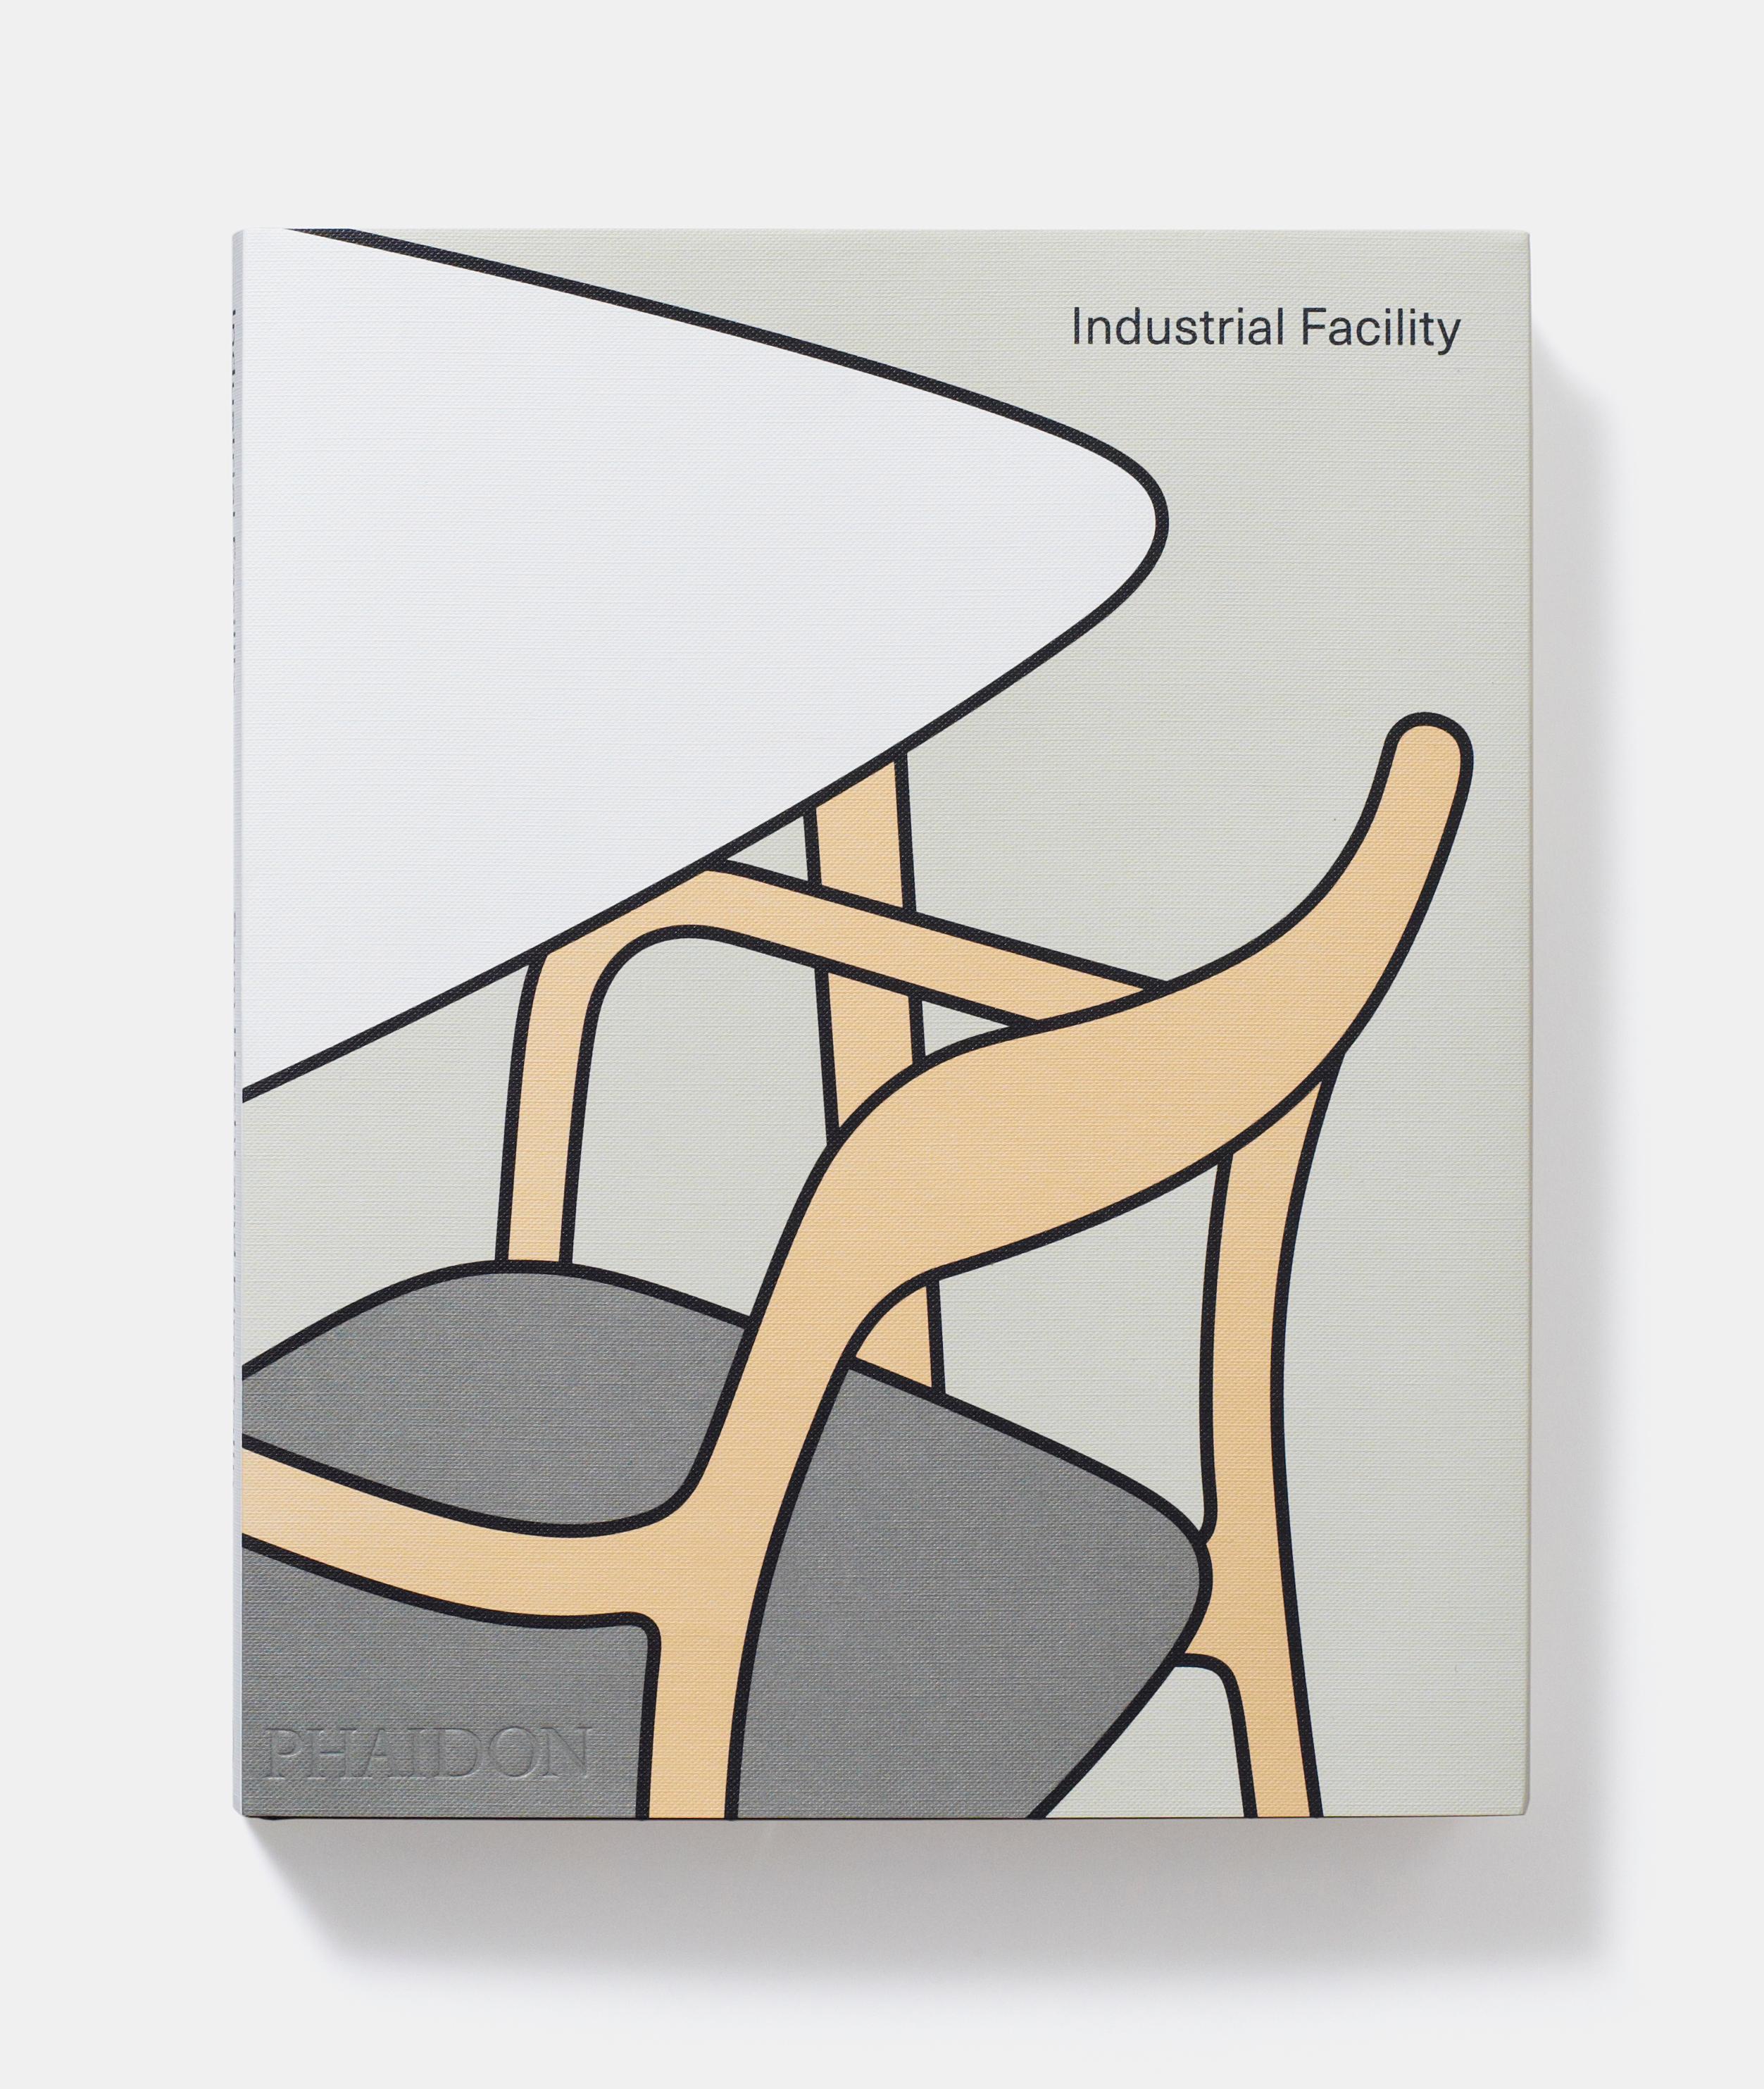 The first monograph on the complete works of award-winning design studio Industrial Facility

Sam Hecht and Kim Colin's world-renowned, London-based studio is one of the most influential in Industrial Design, and their work has enjoyed a global